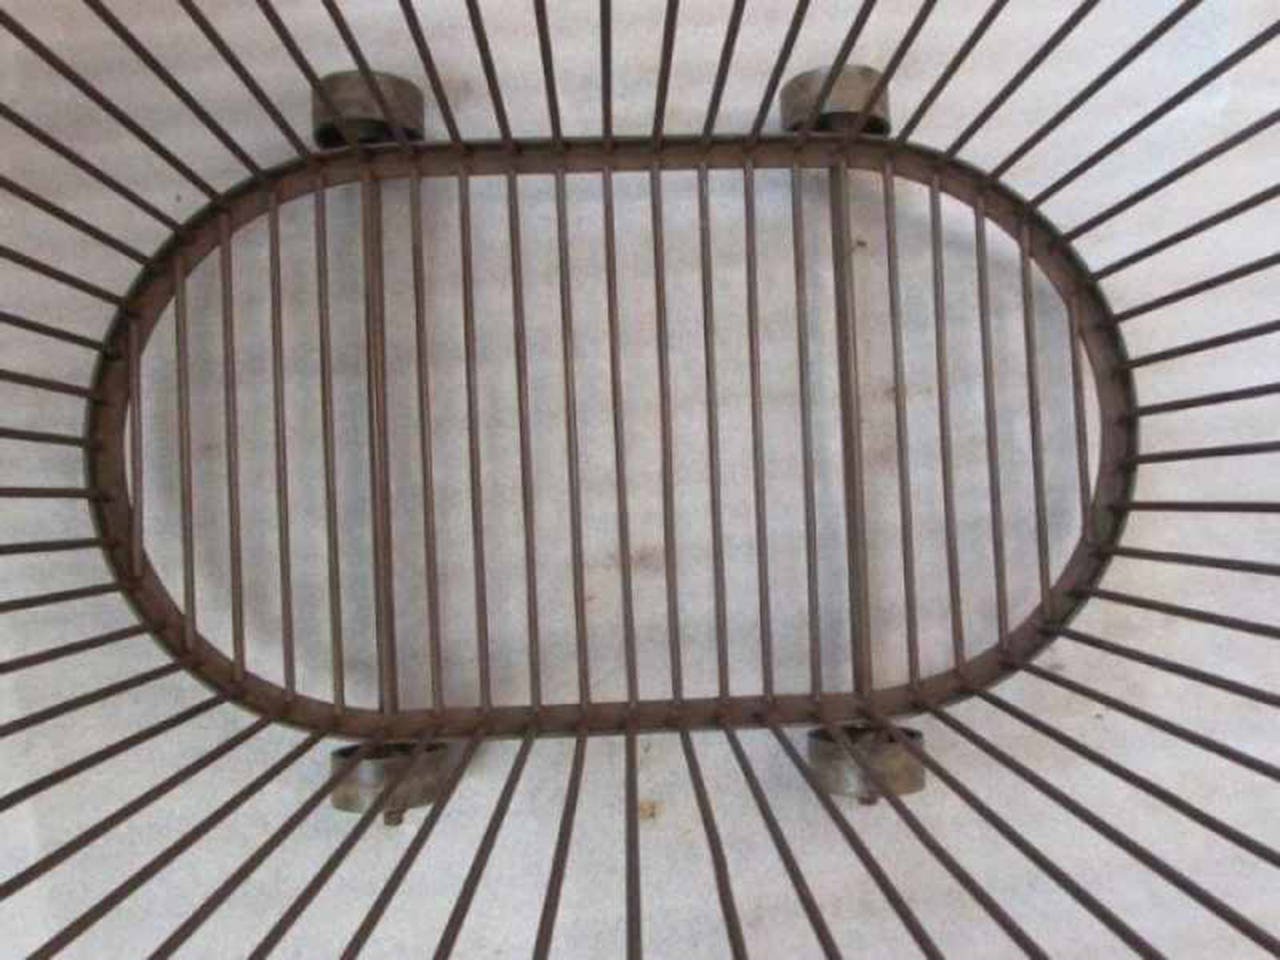 Antique bakery basket  used in the 1900's, made of wrought iron with iron wheels.
If you have any questions please feel free to contact us. 

DETAILS:
Overall Dimension:39 1/2